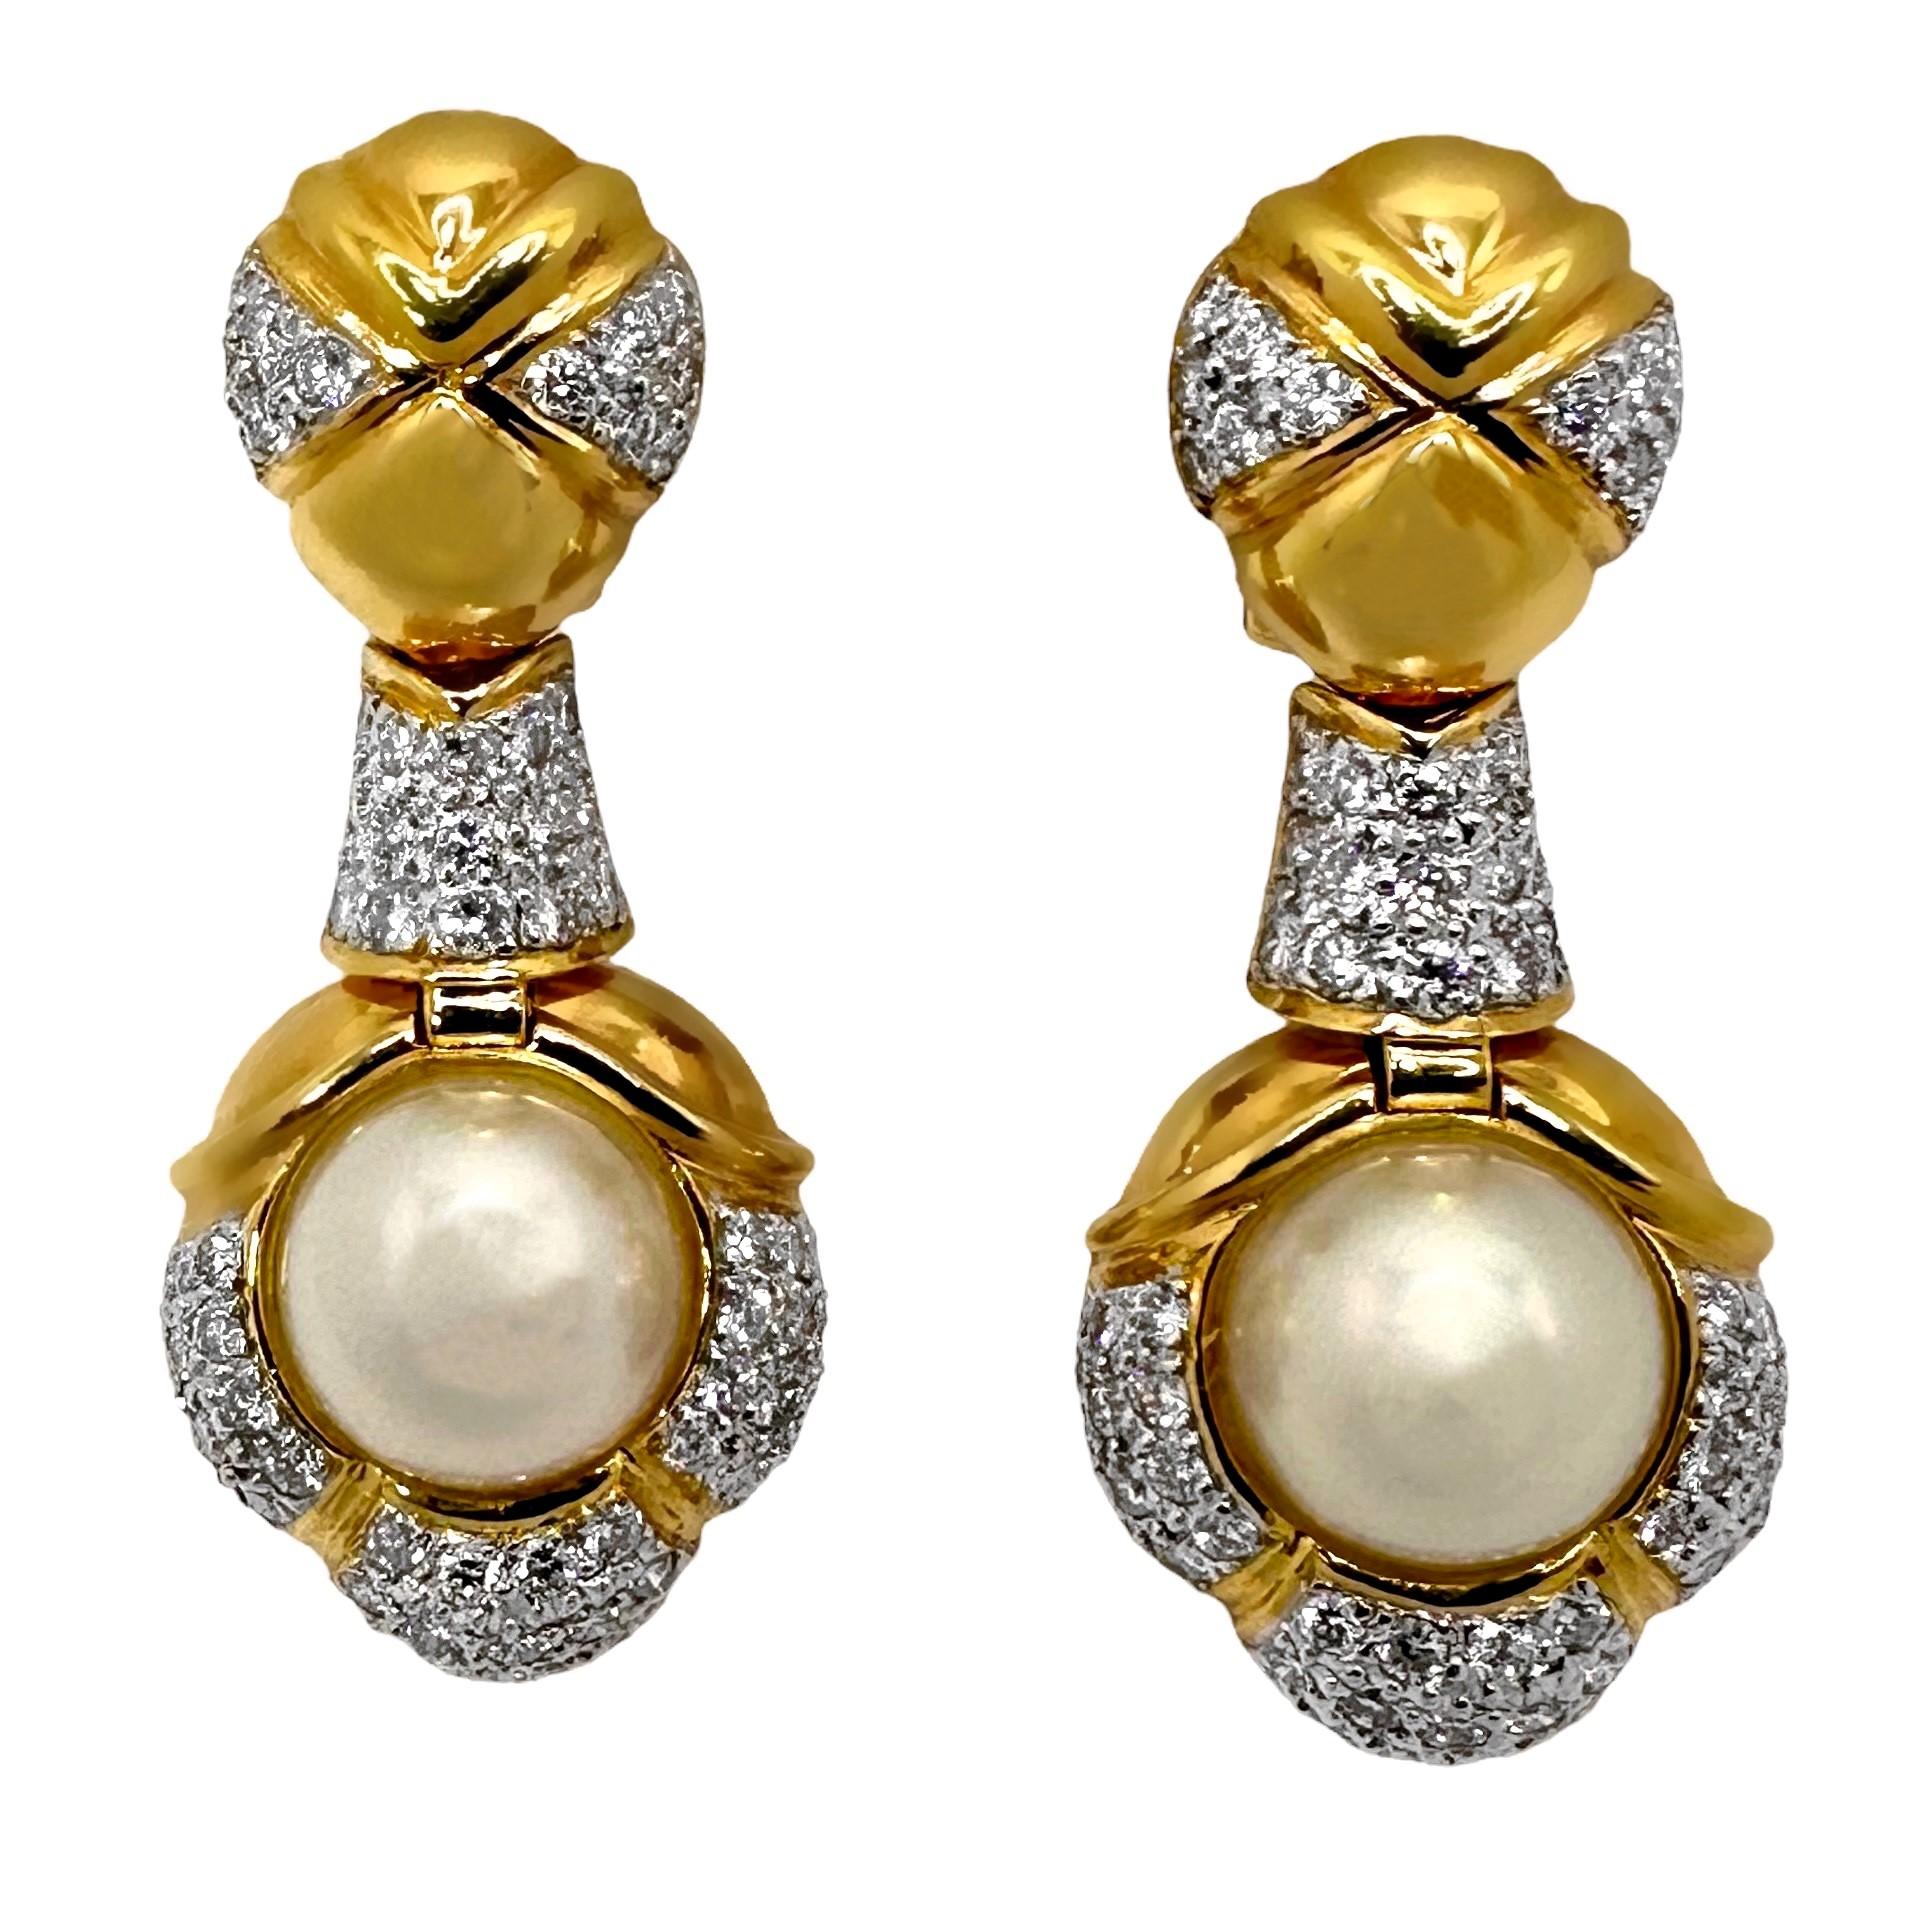 Fashioned in 18k yellow gold, these handsome earrings are set with two 9.5mm cultured pearls adorned with high quality brilliant cut diamonds.
Total diamond weight is 1.91ct of overall G/H color and VS1 clarity. 
Measures 1 3/4 inches long by 5/8